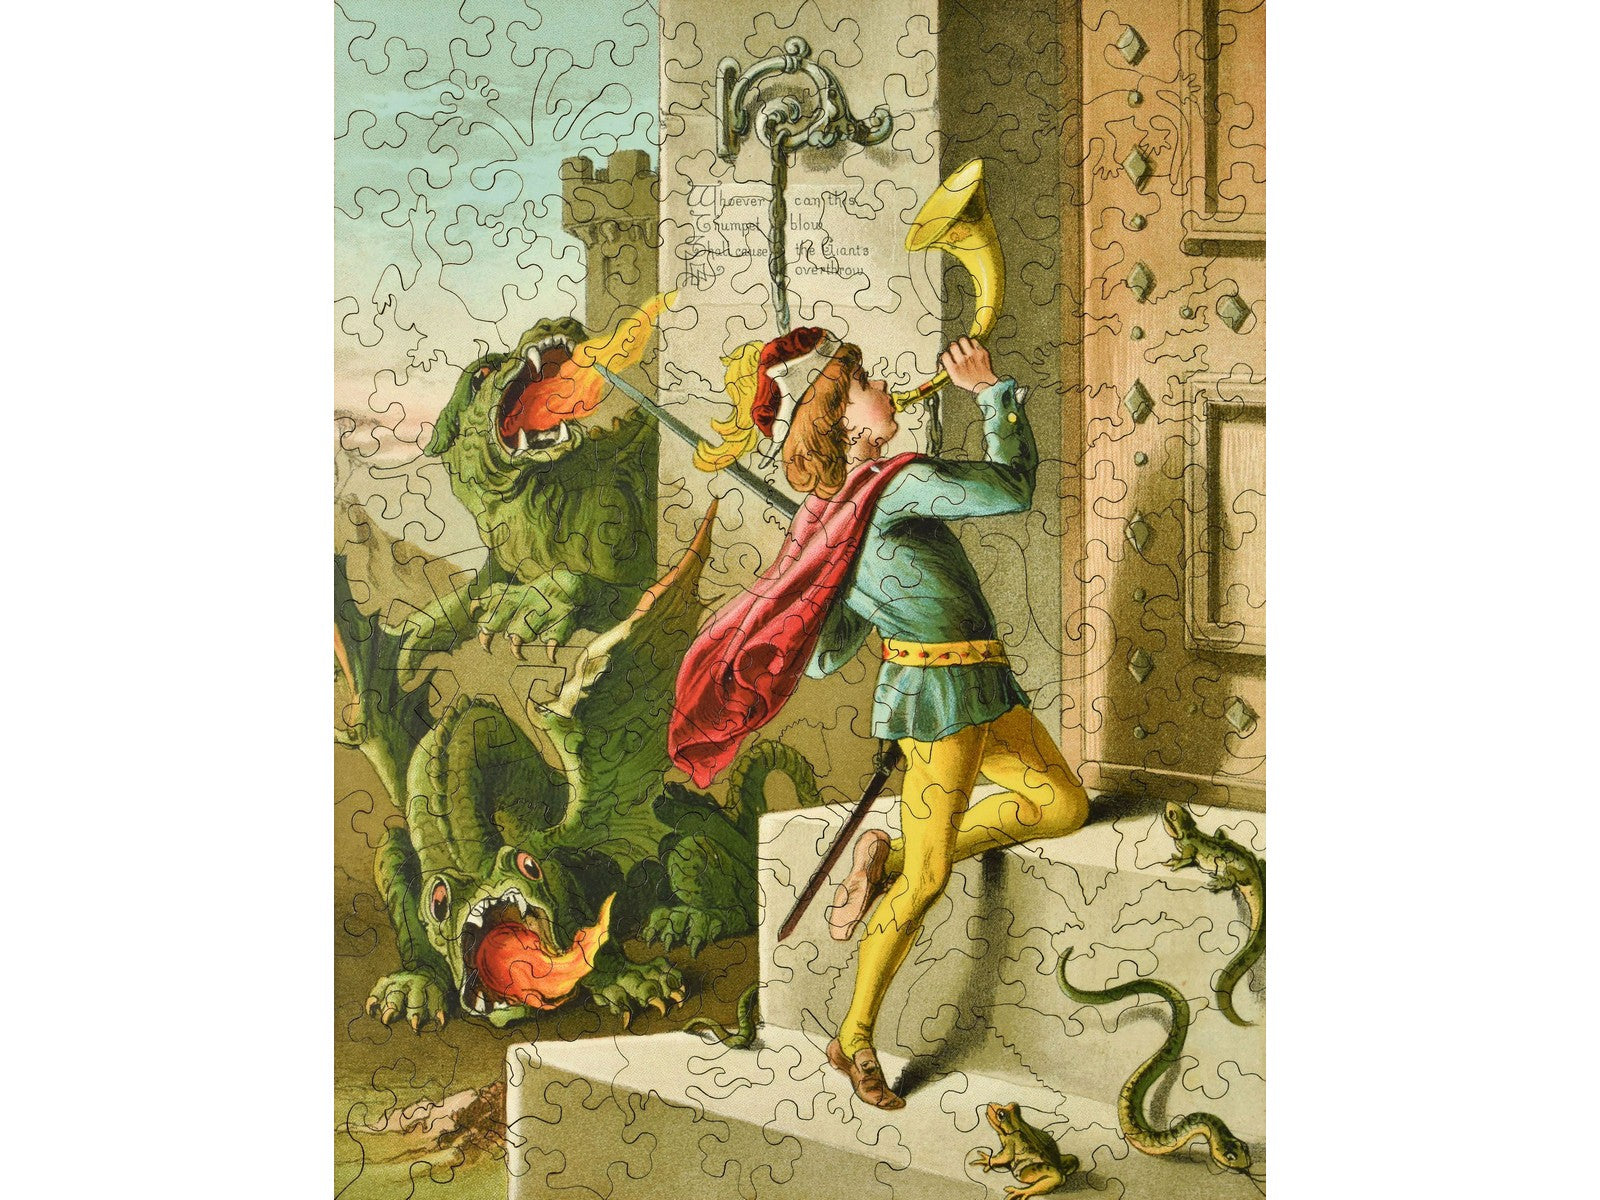 The front of the puzzle, Jack the Giant Killer, which shows a boy blowing a trumpet at a castle door.